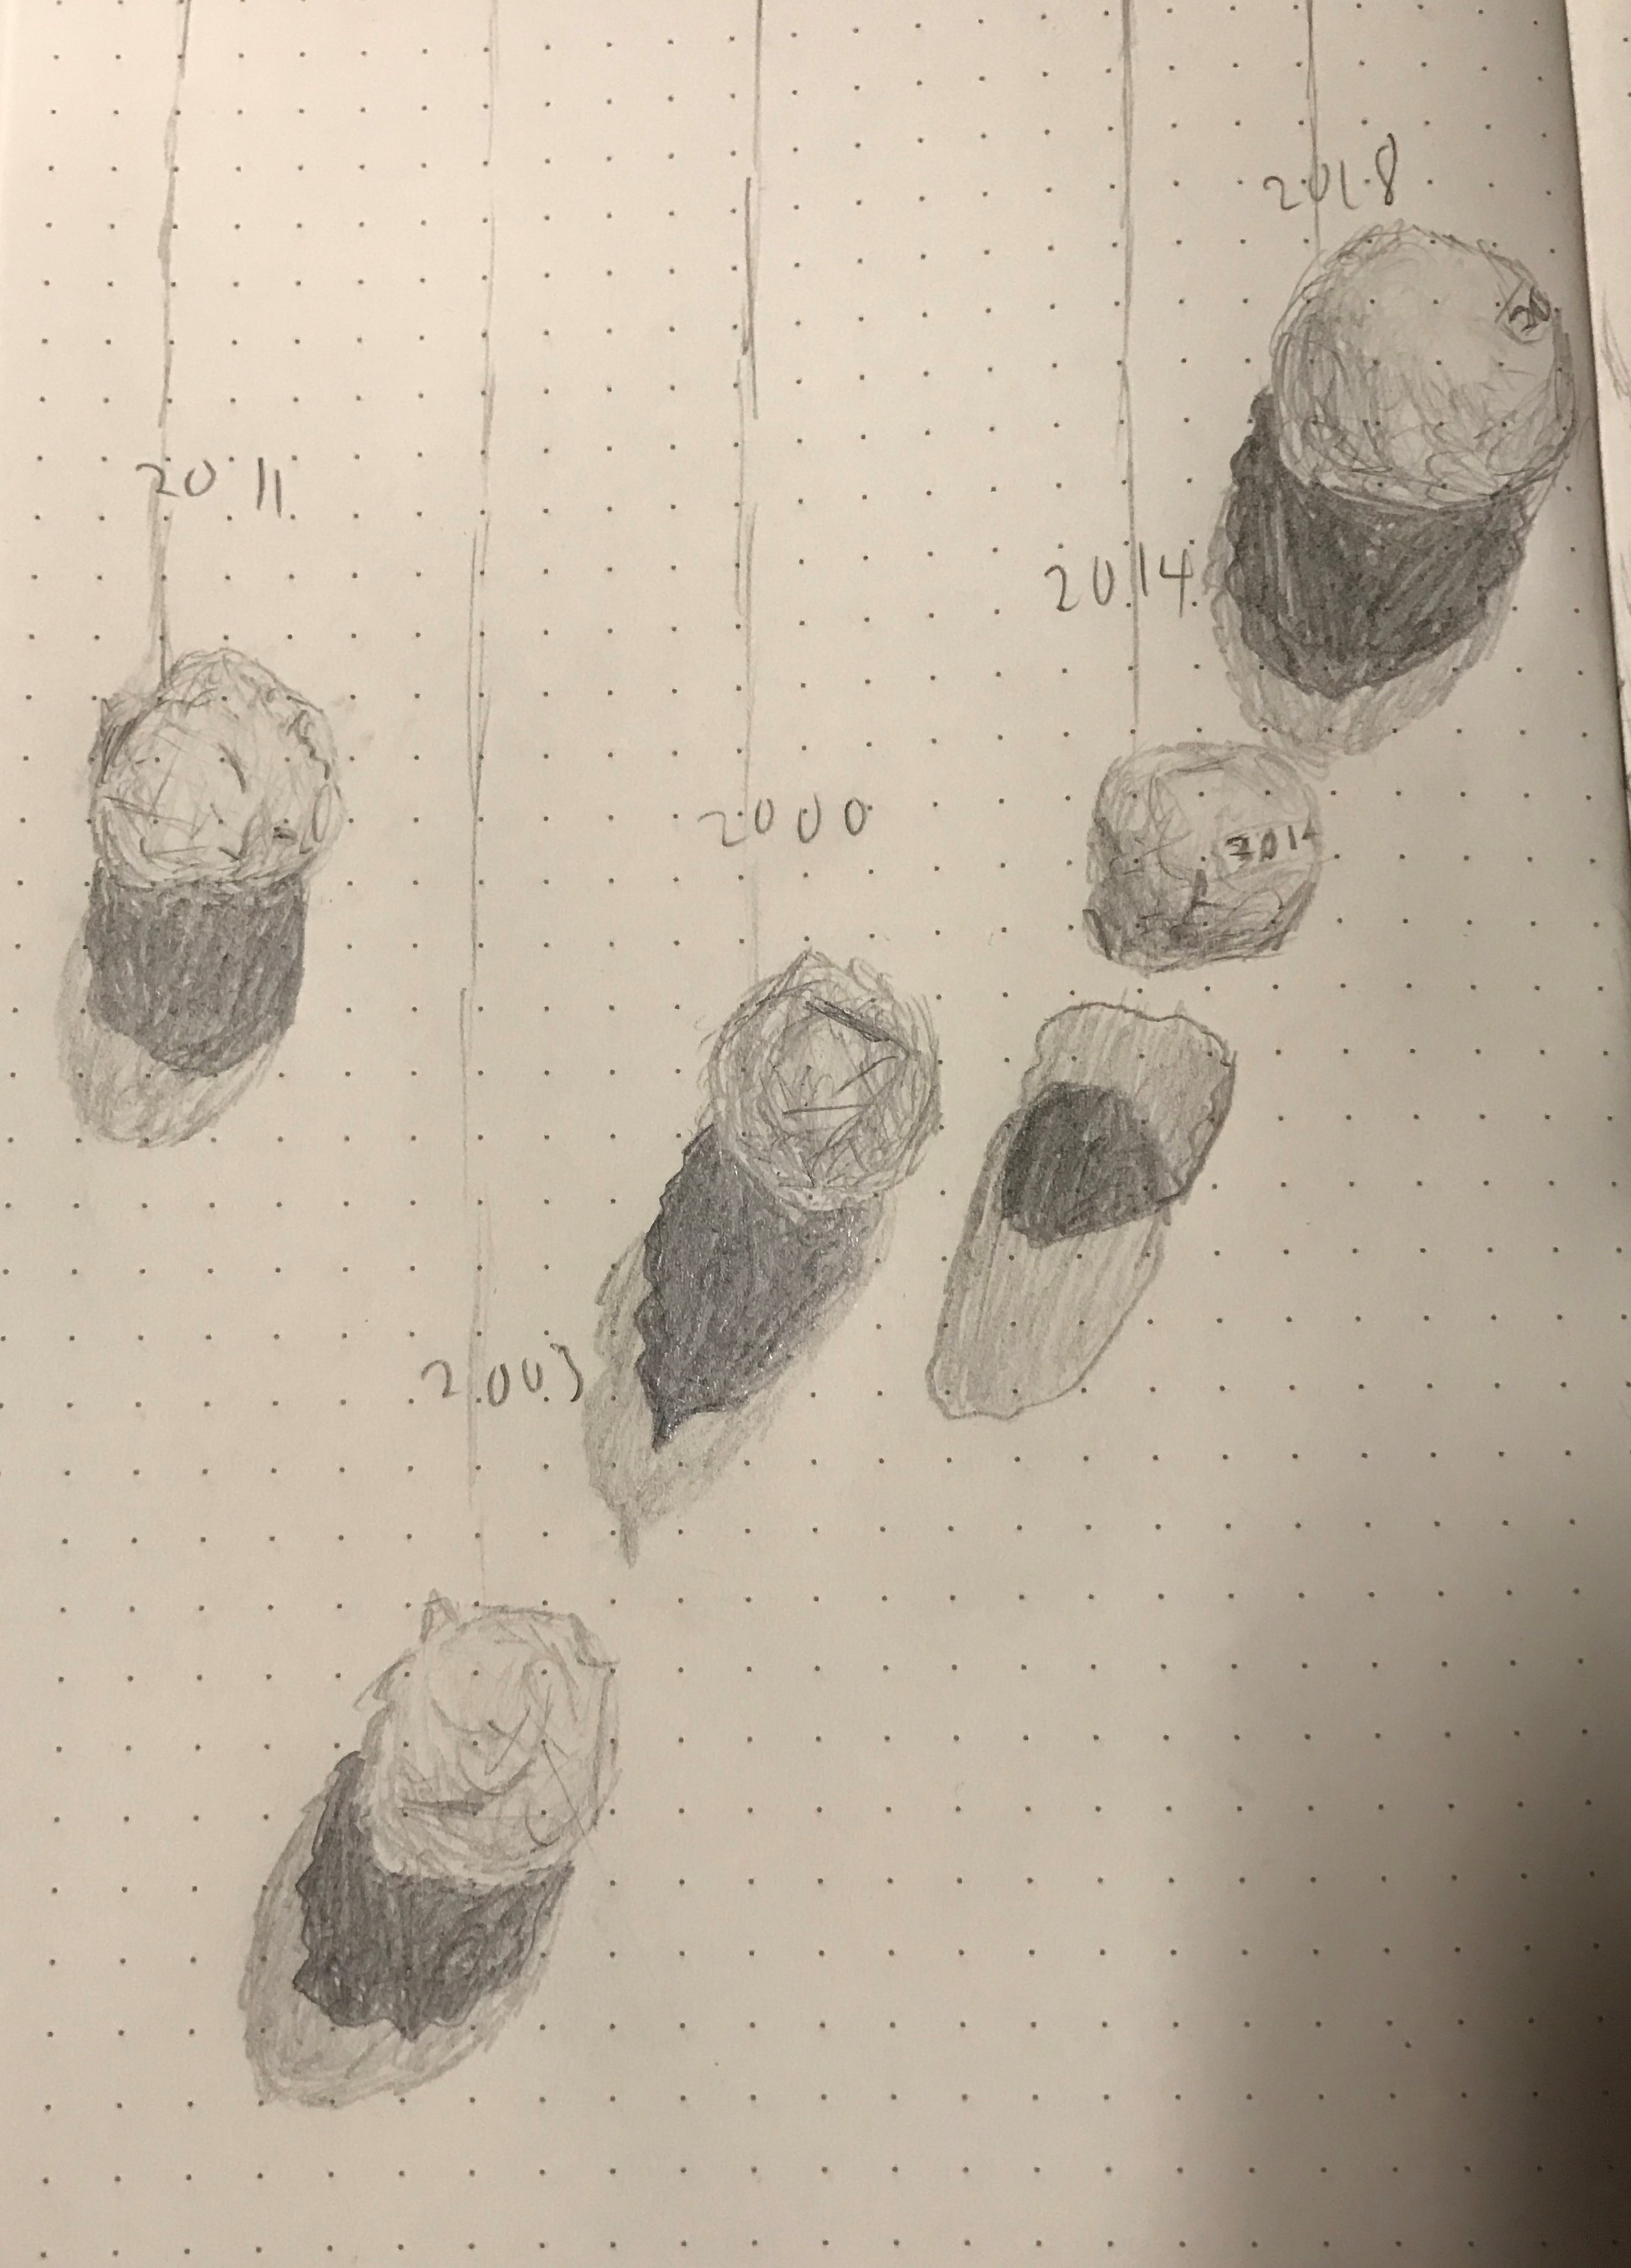 Alec Chen, Sketch of Jeff Shelton's Collection of Tape Balls, 2005-2018. 